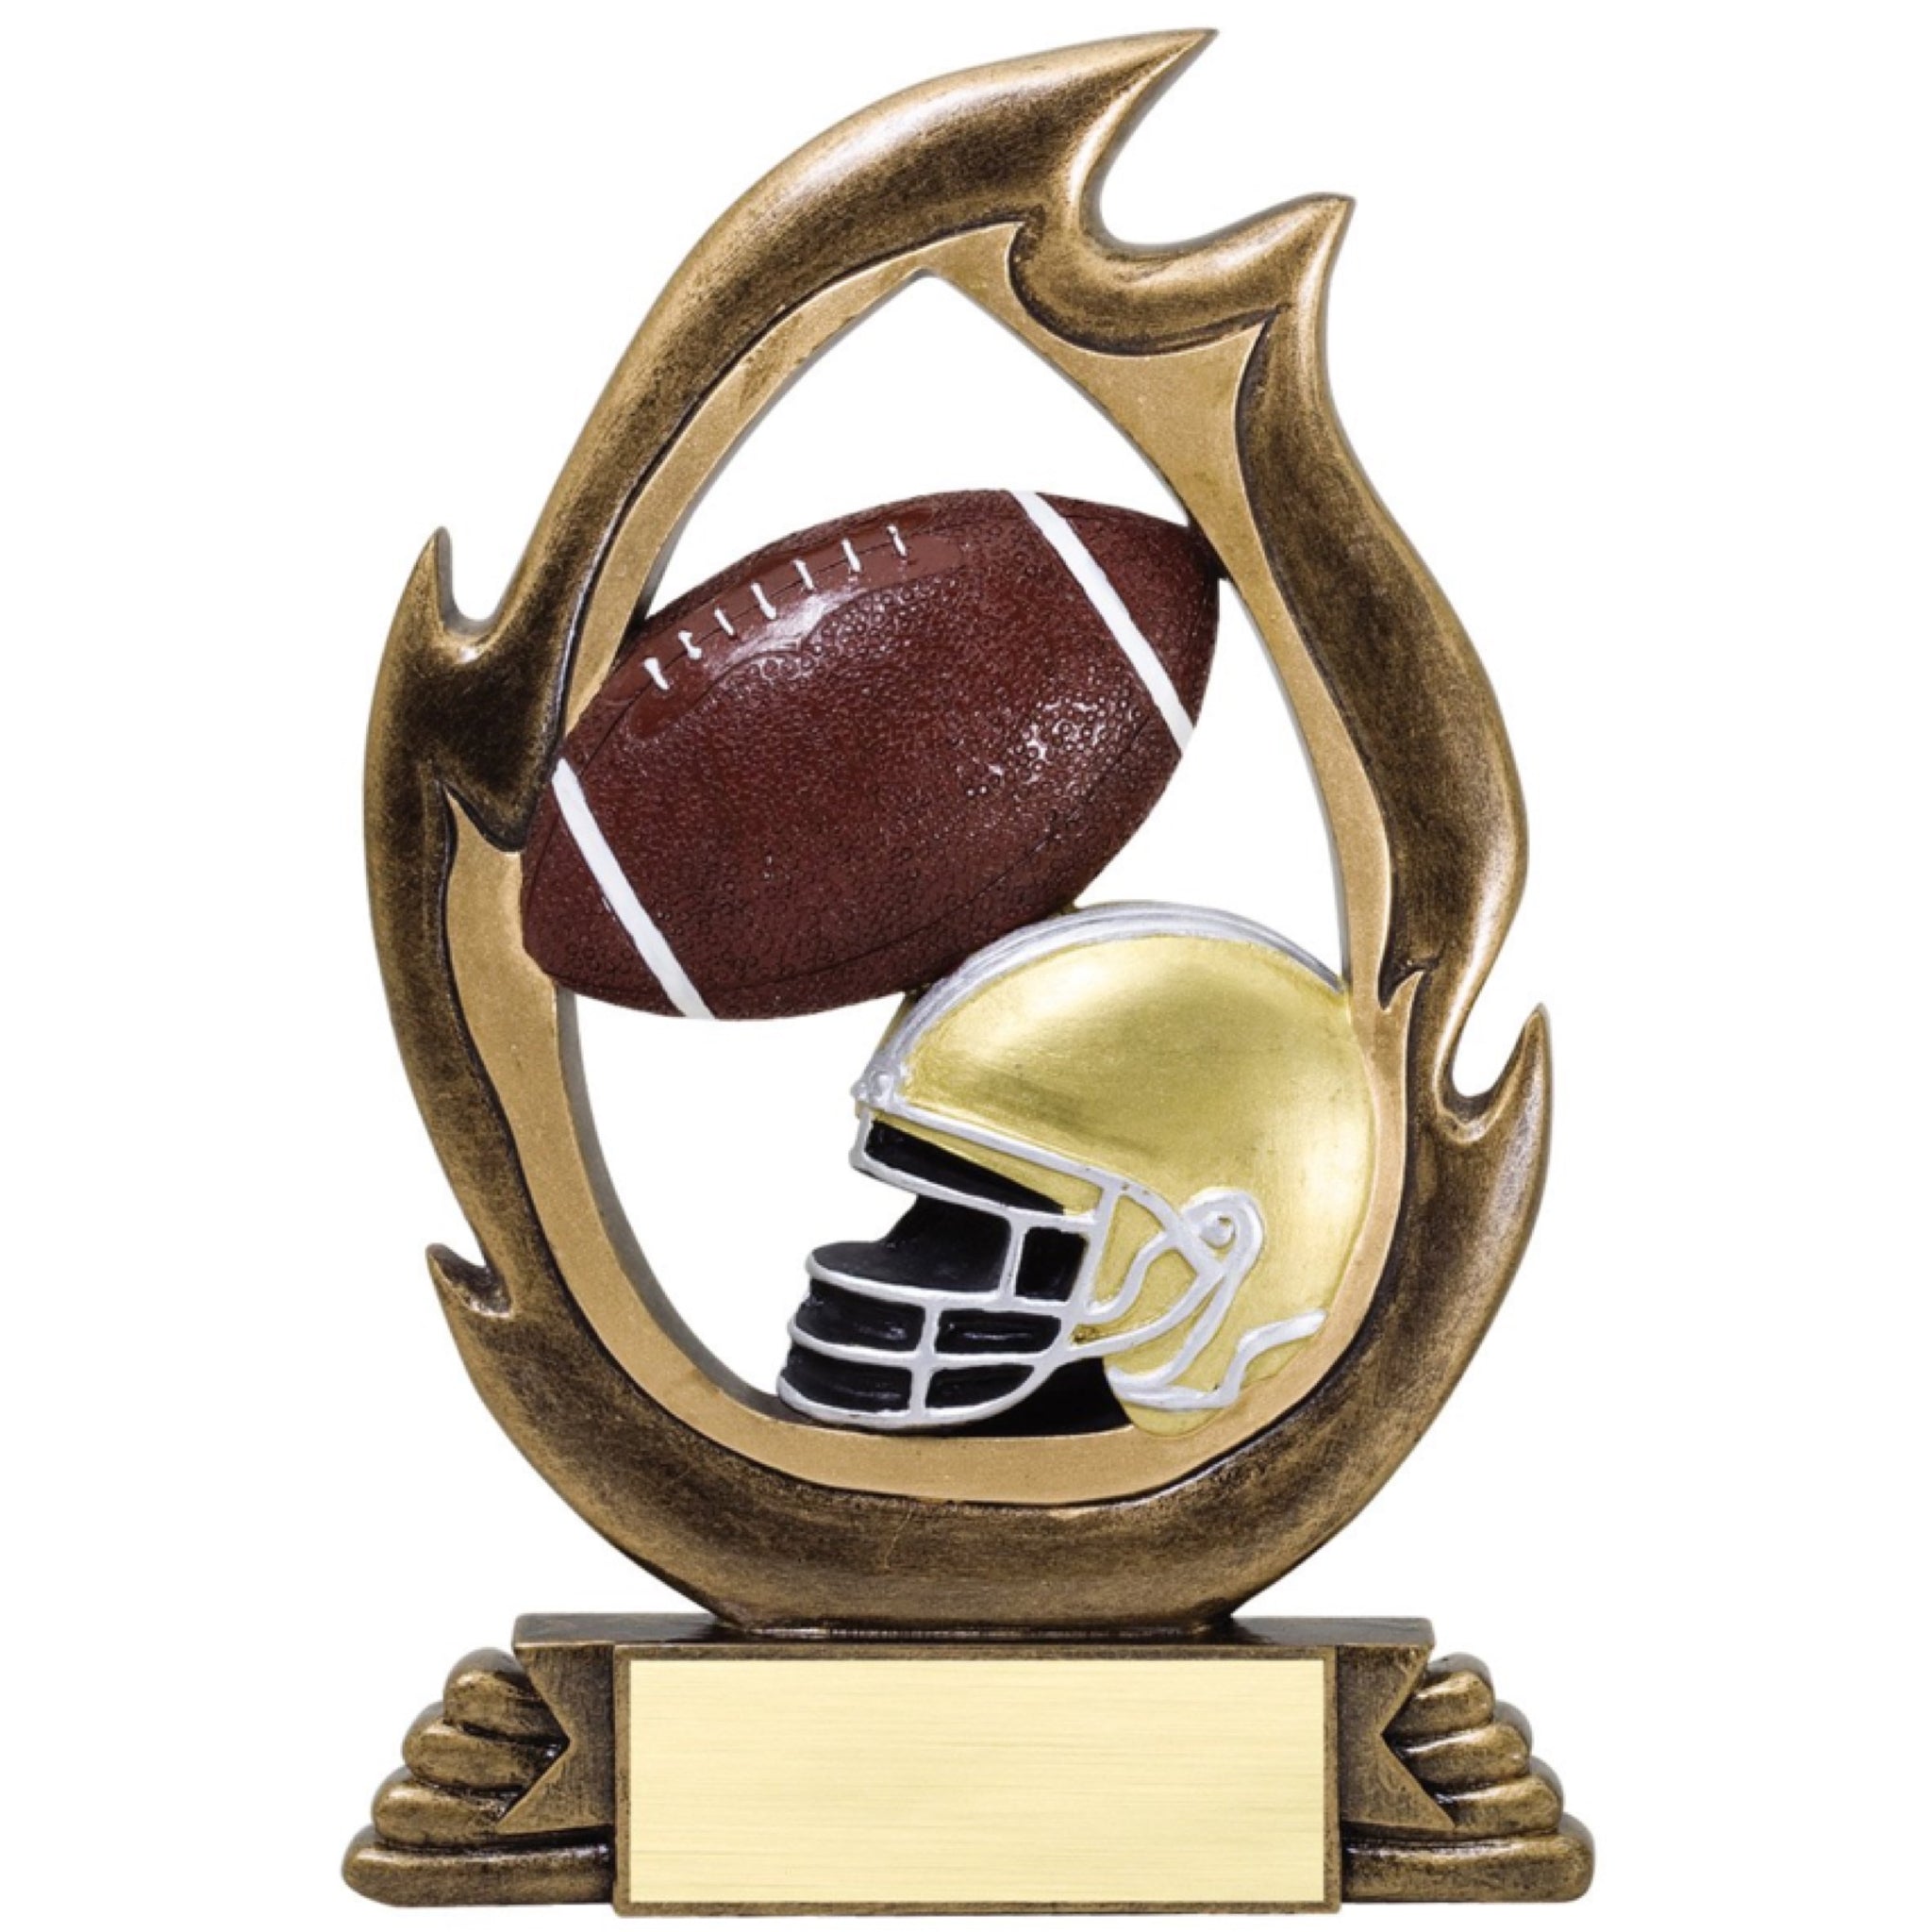 Bronze flame shaped football resin featuring a gold and black football helmet and a brown and white football design inside the flame.